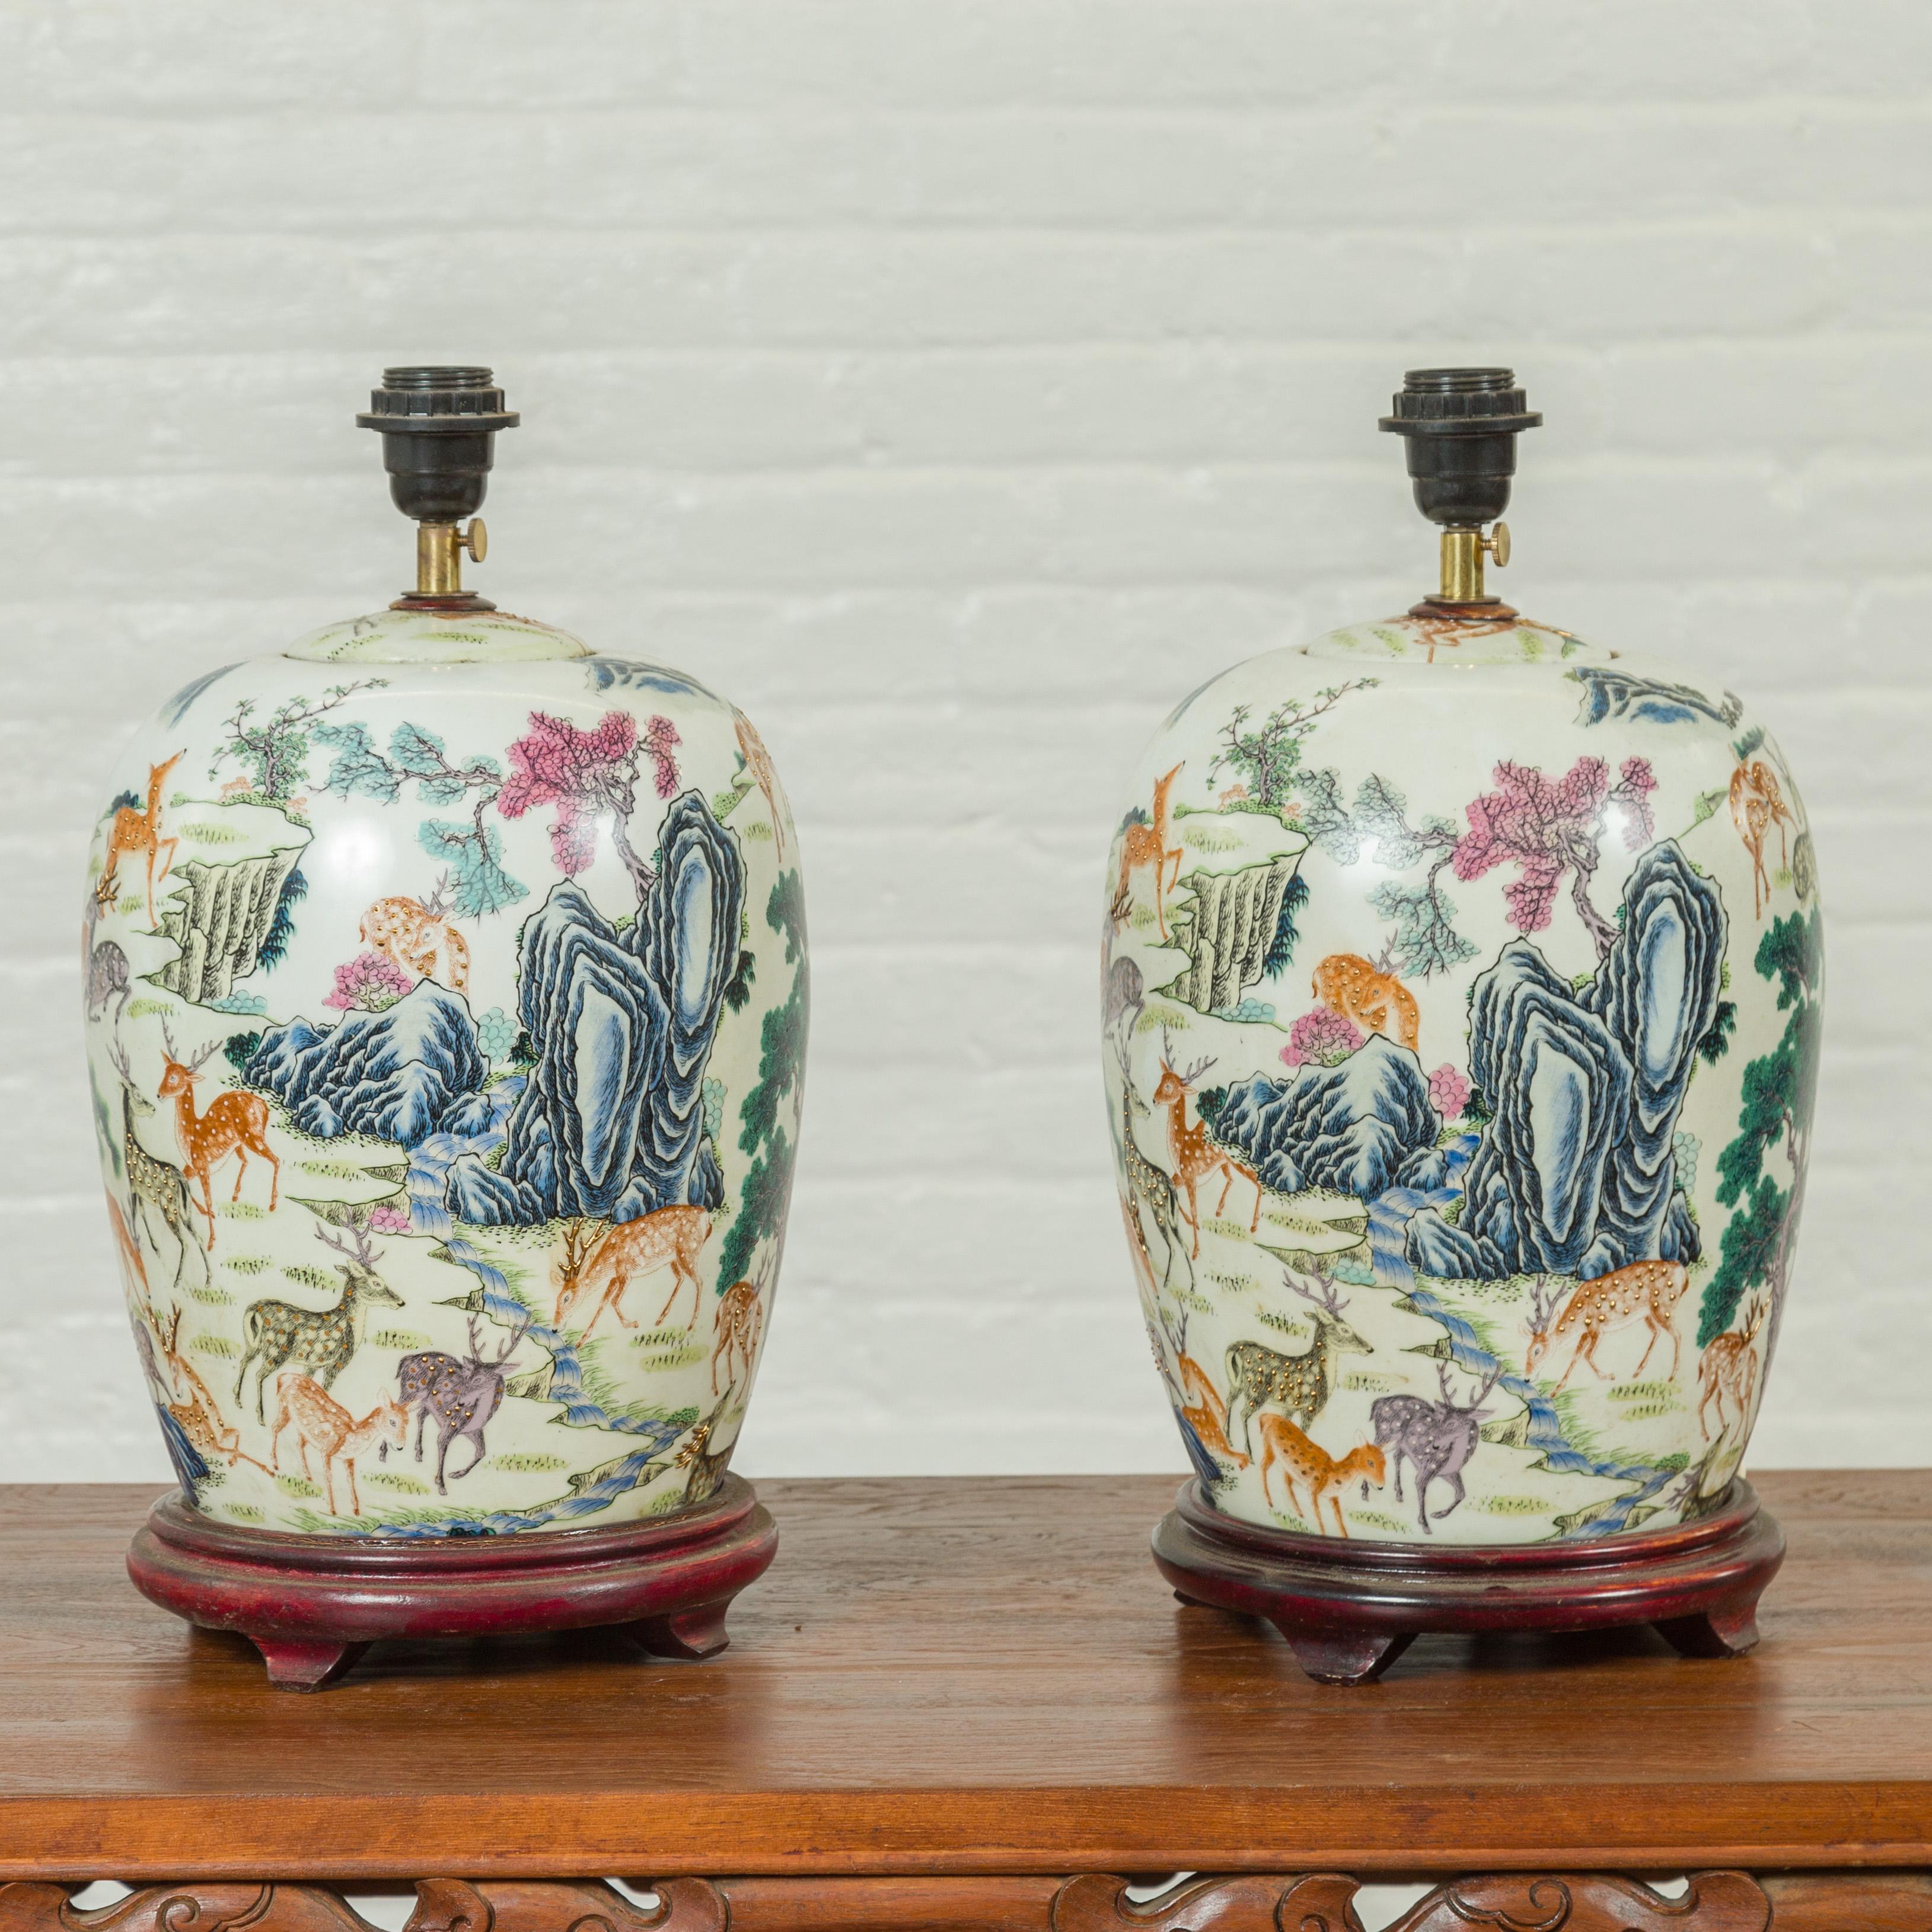 A near pair of Chinese deer in mountains table lamps from the 20th century, on wooden bases. Our eyes are immediately drawn to the delicate depiction of elegant deer and stags evolving inside a mountainous landscape highlighted with colorful trees.